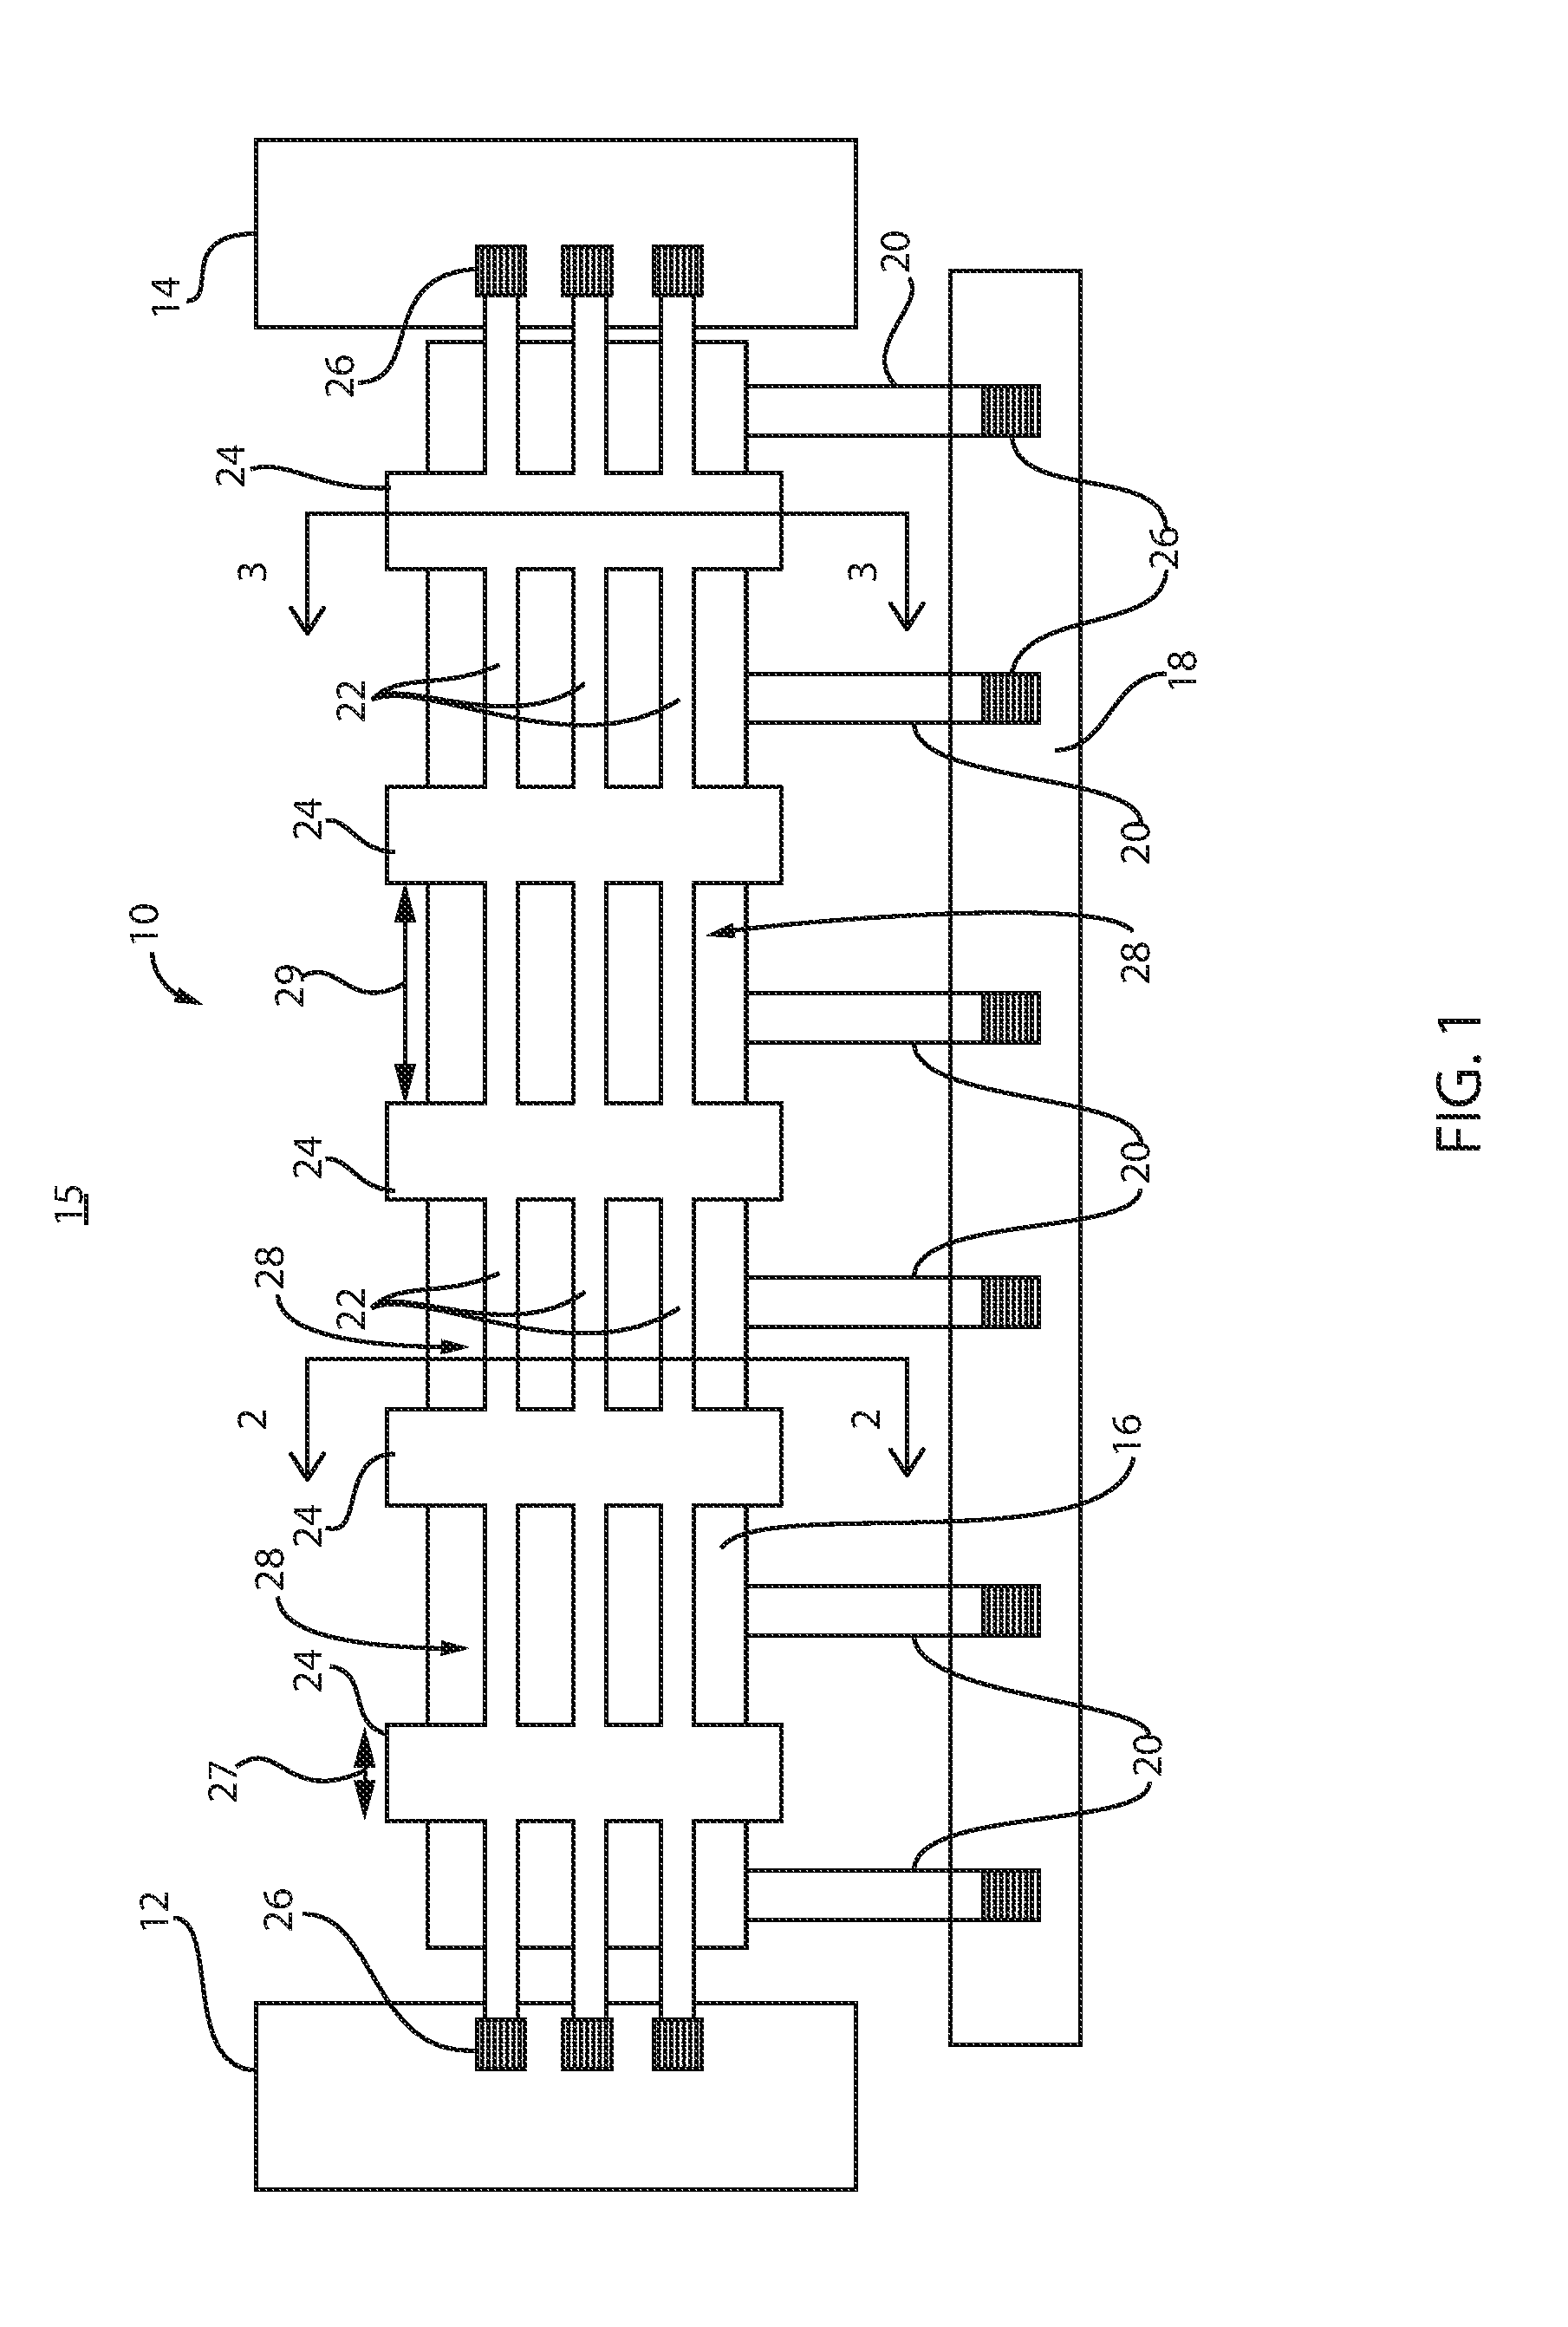 Support for long channel length nanowire transistors